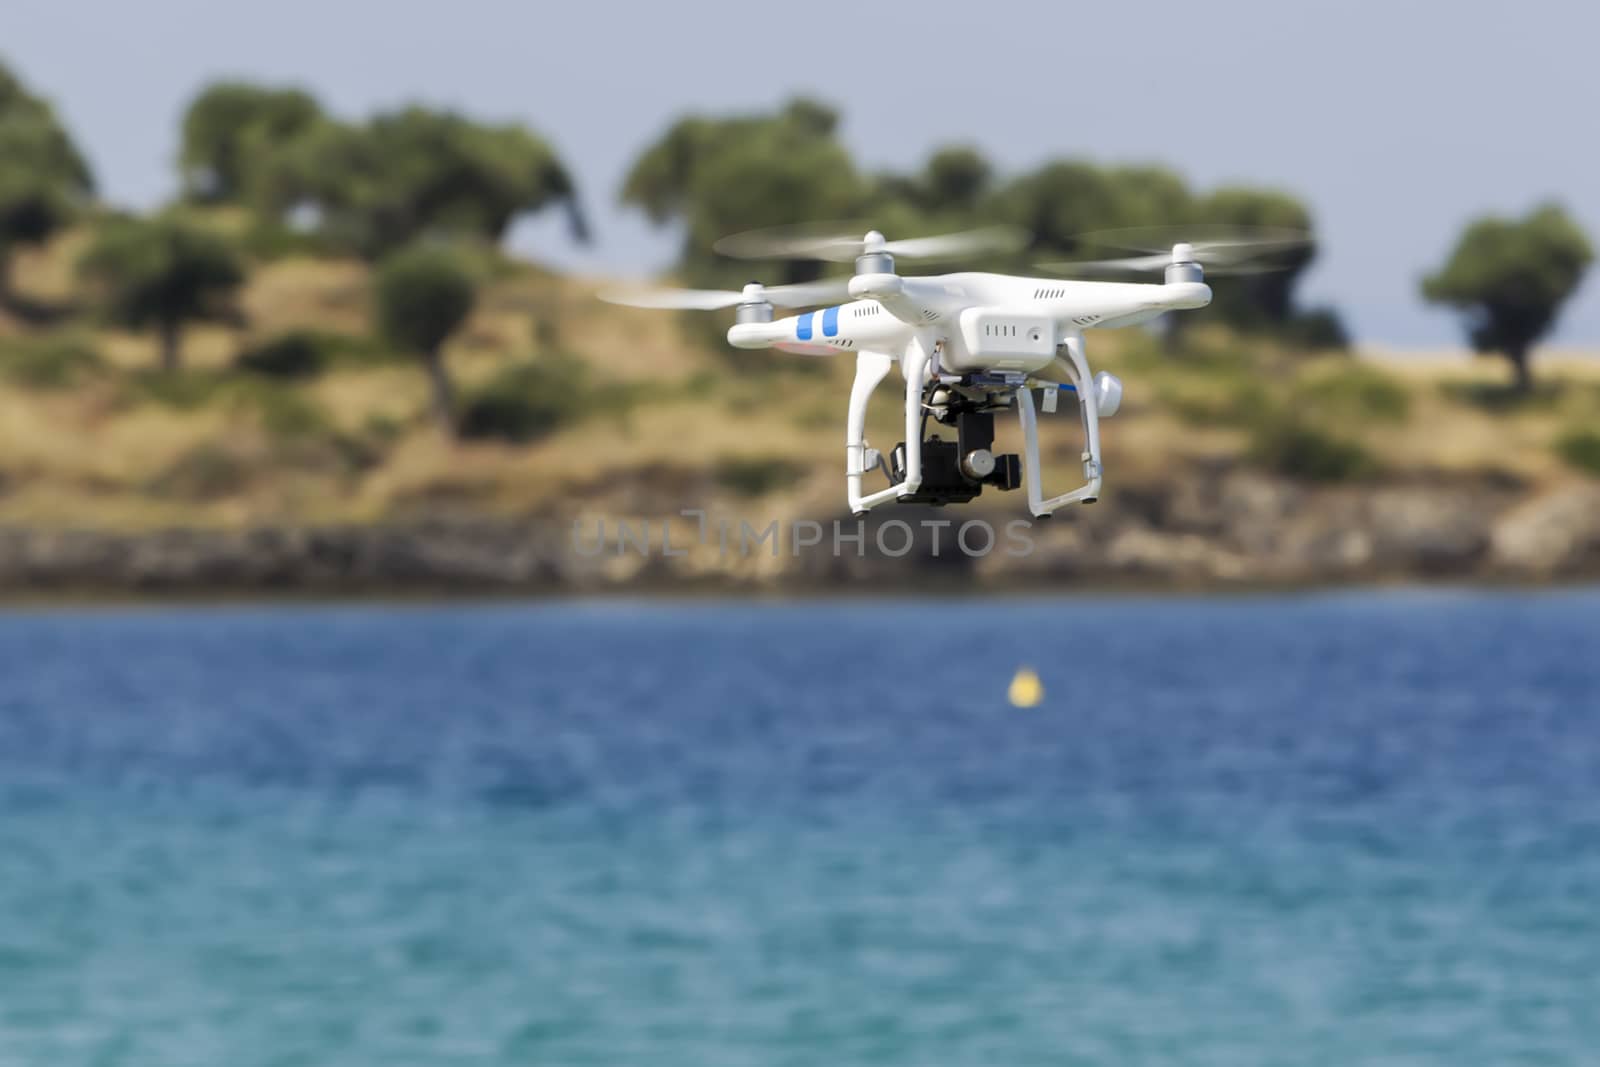 MARMARAS, GREECE- JULY 29, 2014: DJI Phantom drone in flight with a mounted GoPro Hero3+ Black Edition digital camera in Marmaras, Greece. DJI Industries produces unmanned aircraft for surveillance